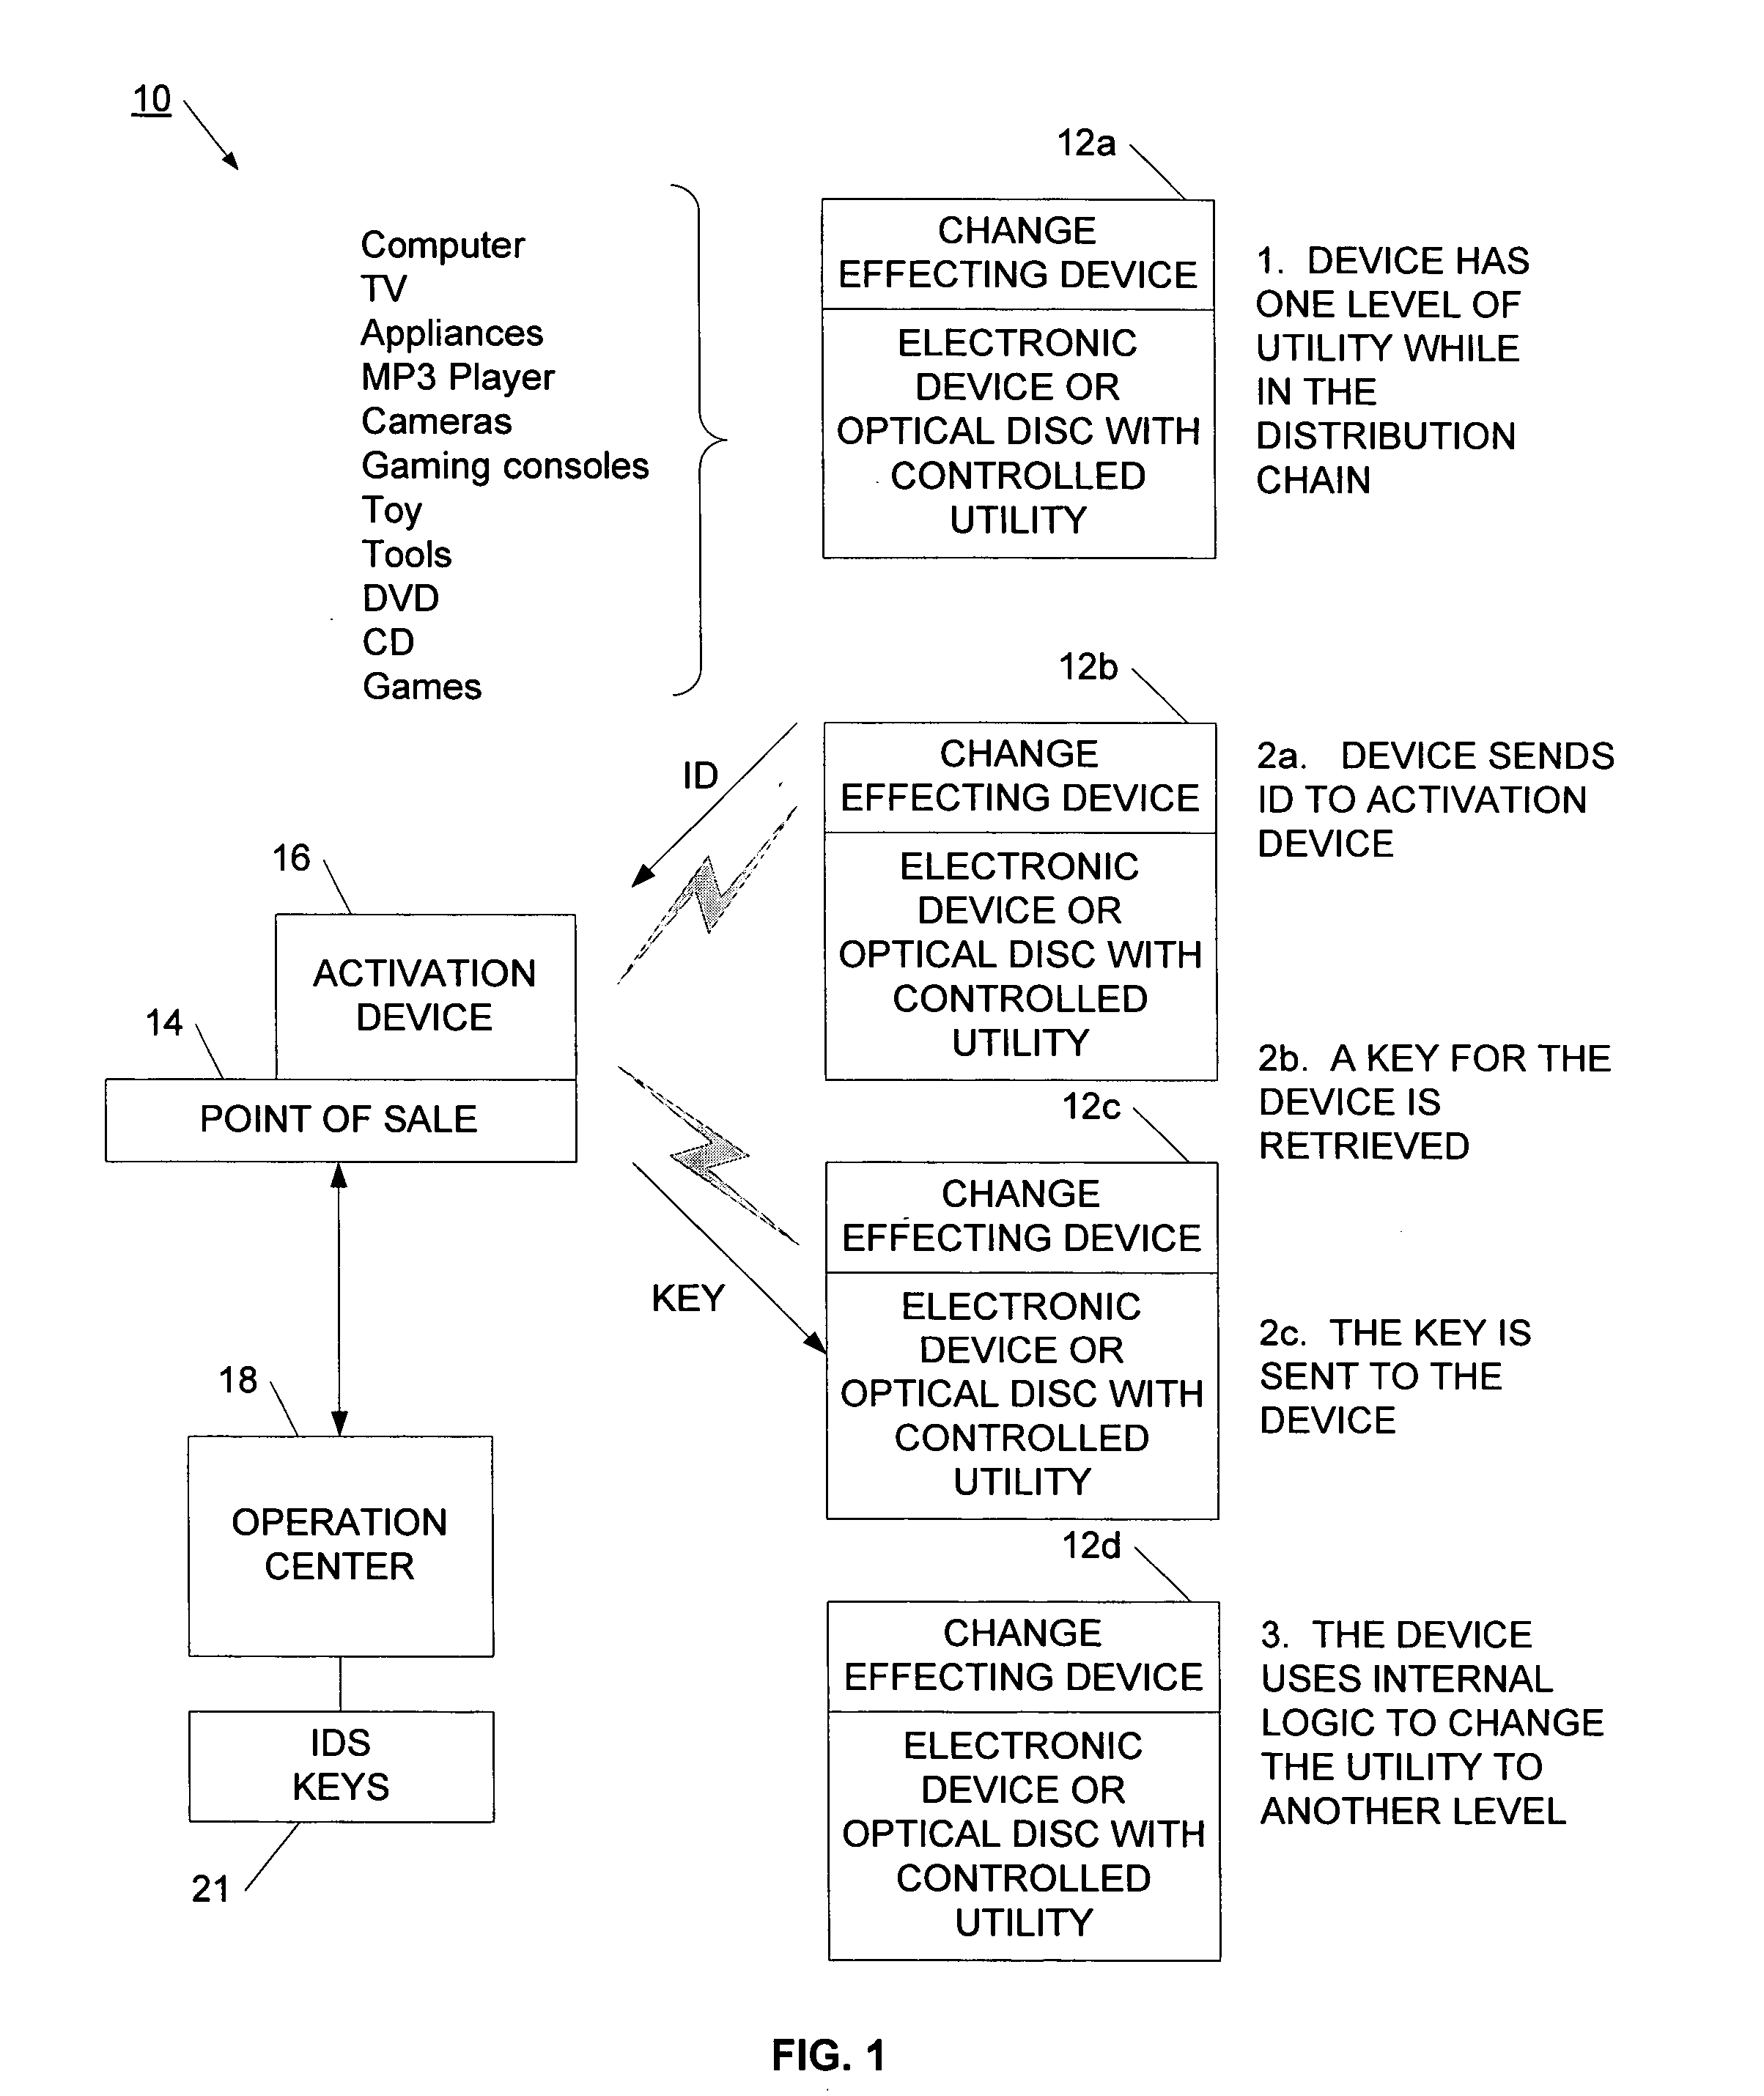 Method and system for selectively controlling the utility a target